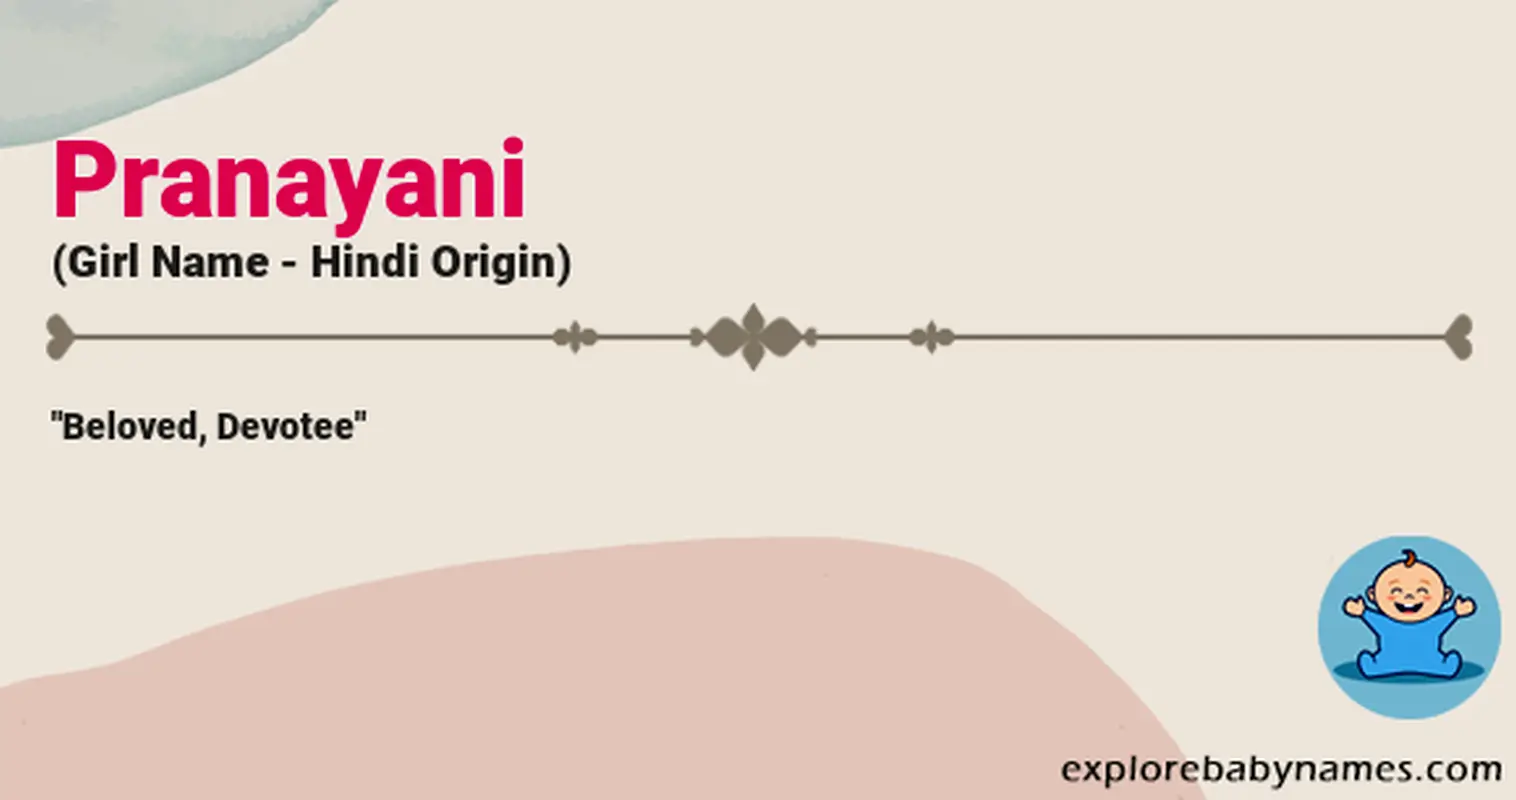 Meaning of Pranayani